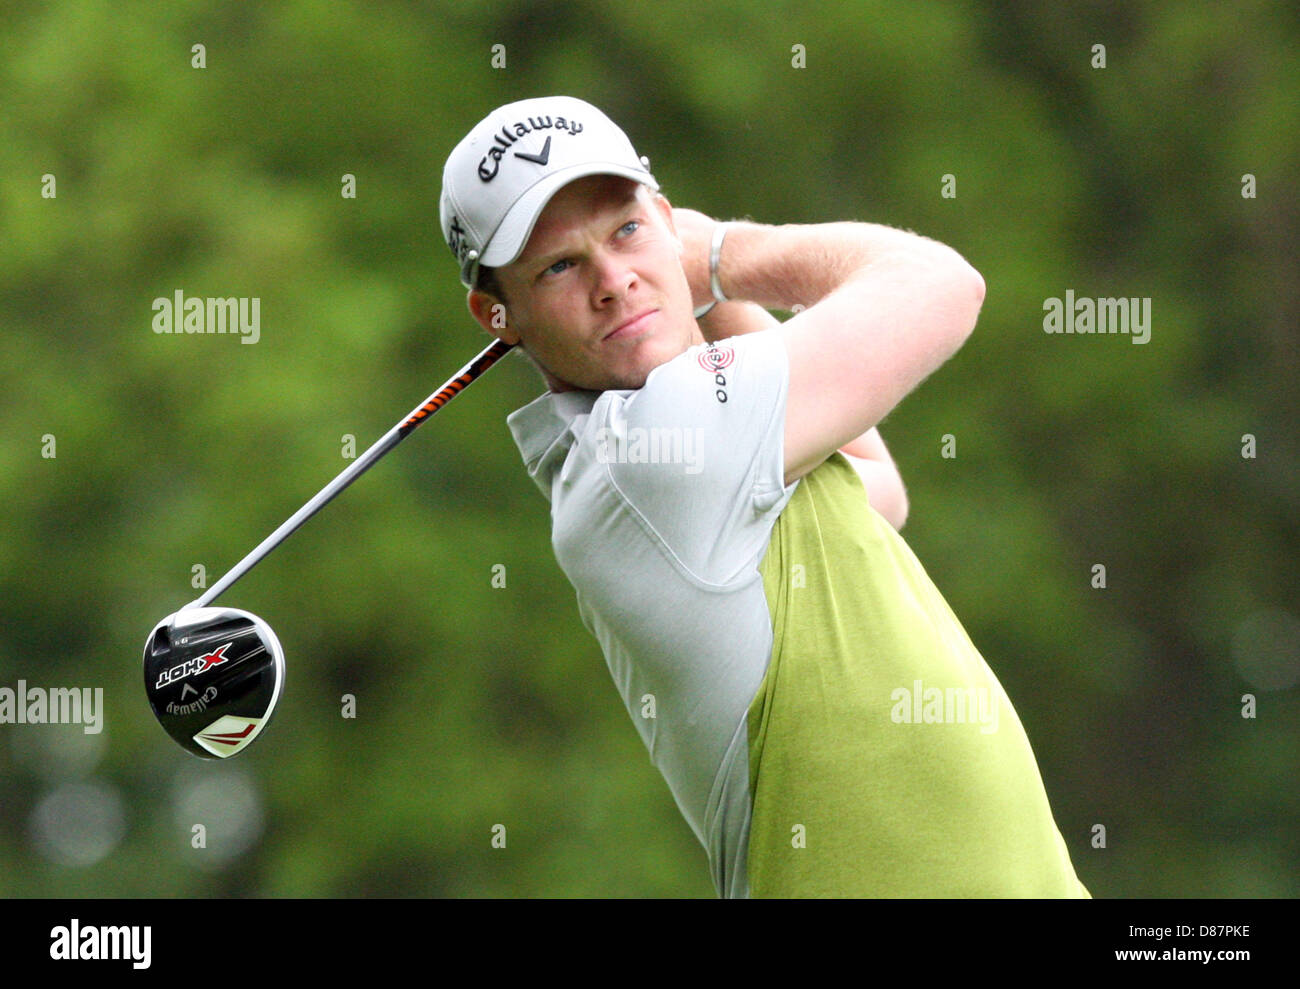 21.05.2013 Wentworth, England. Danny Willett during practice ahead of the BMW PGA Championships. Stock Photo